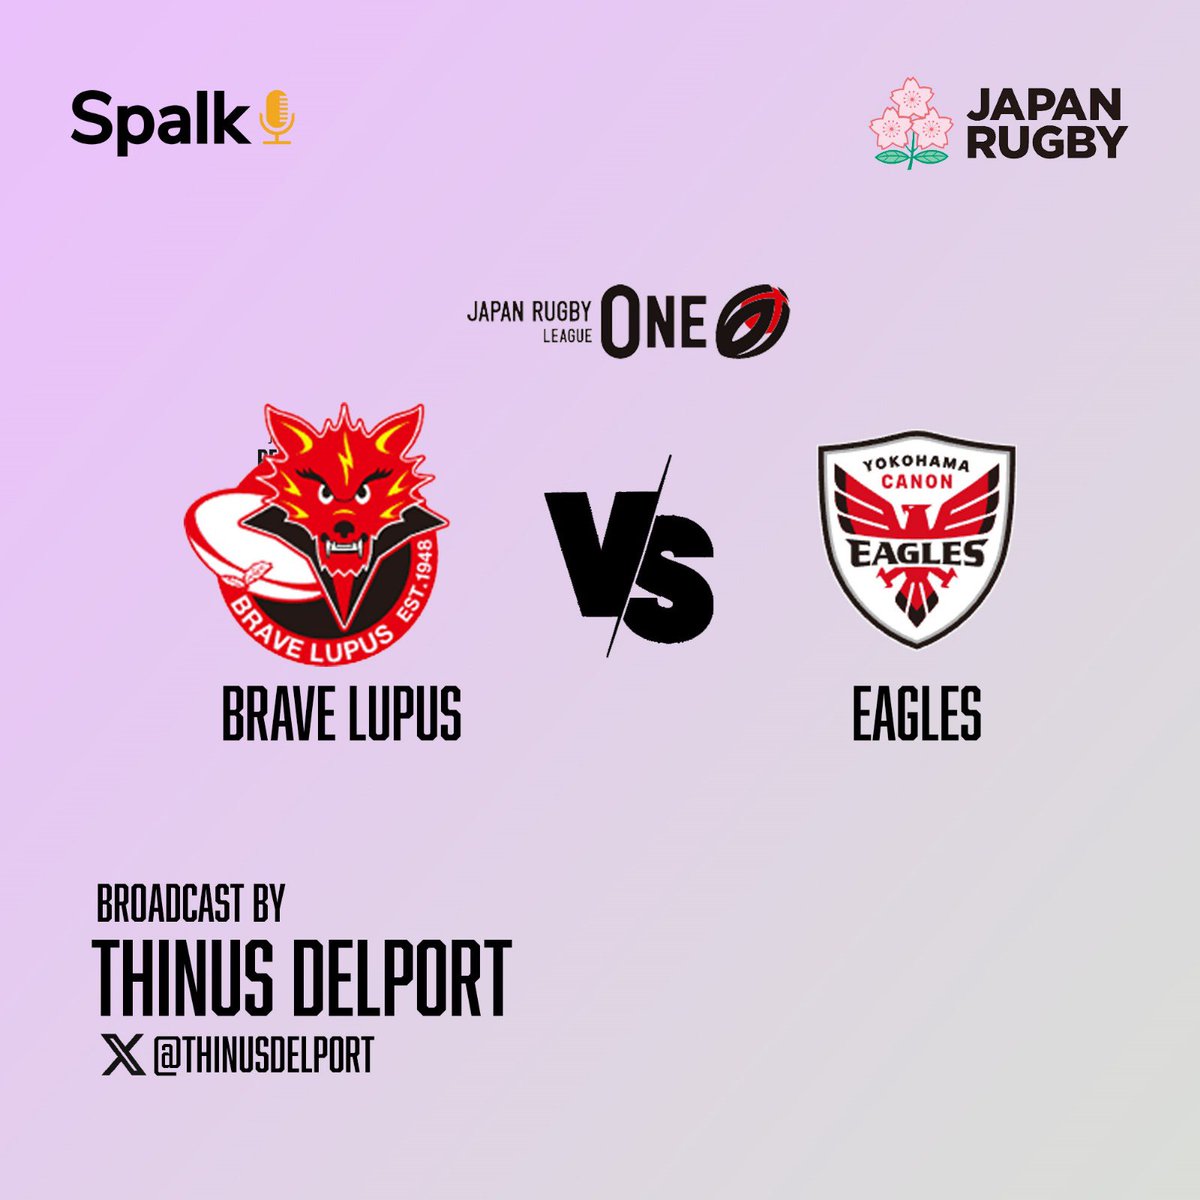 Looking forward to commentate on what promises to be another exciting @LeagueOne_EN encounter on Saturday on @SpalkTalk . Tasty history between these 2 teams over the last couple of seasons with the Eagles edging out Brave Lupus. Tables might be turned on current form.